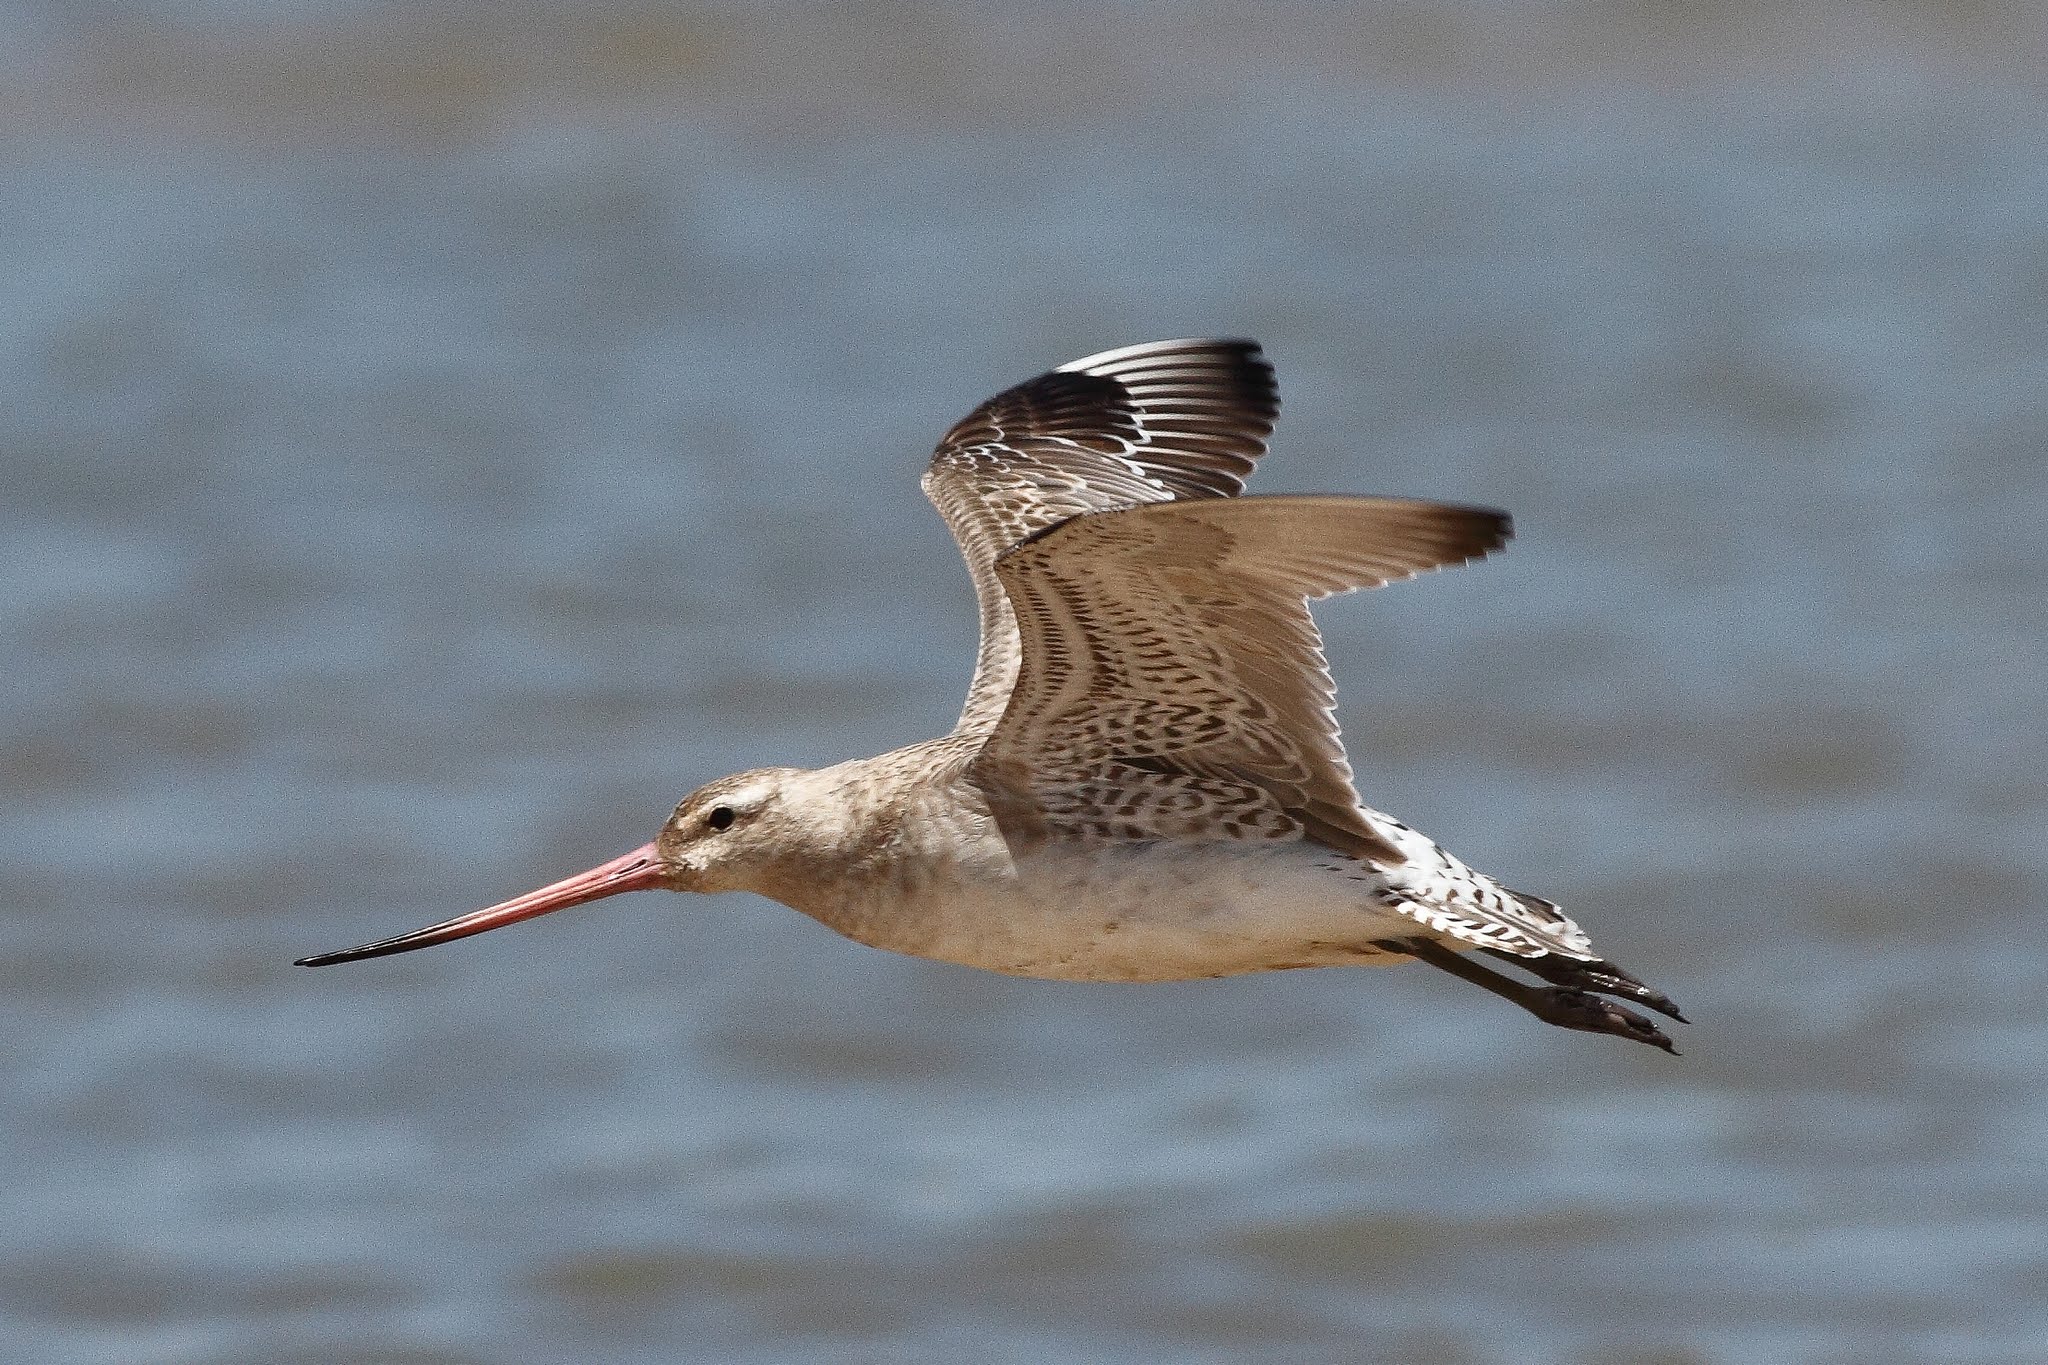 Younger Godwit Units New Report For Longest Non-Cease Fowl Flight